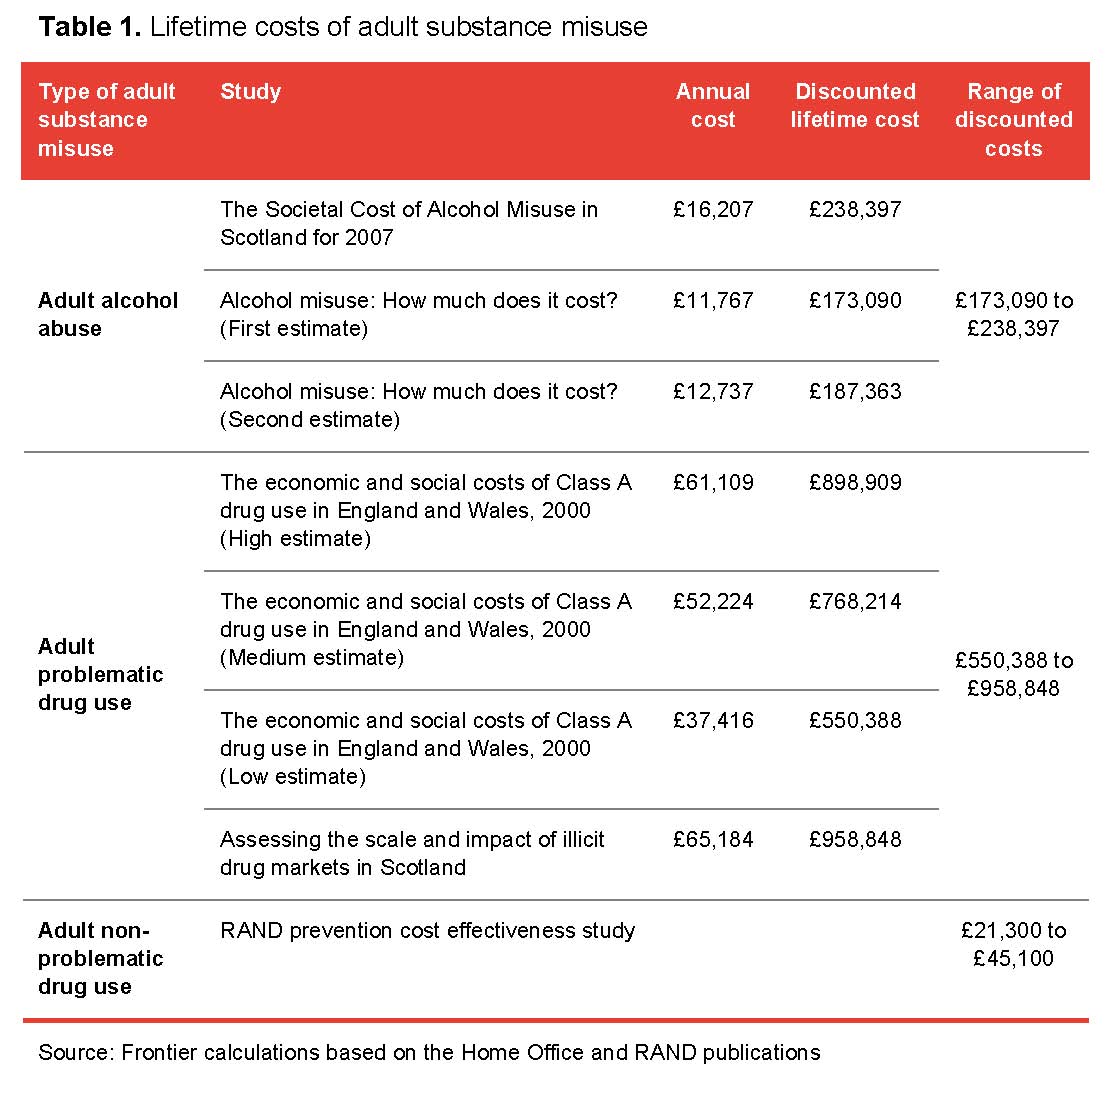 Table 1. Lifetime costs of adult substance misuse